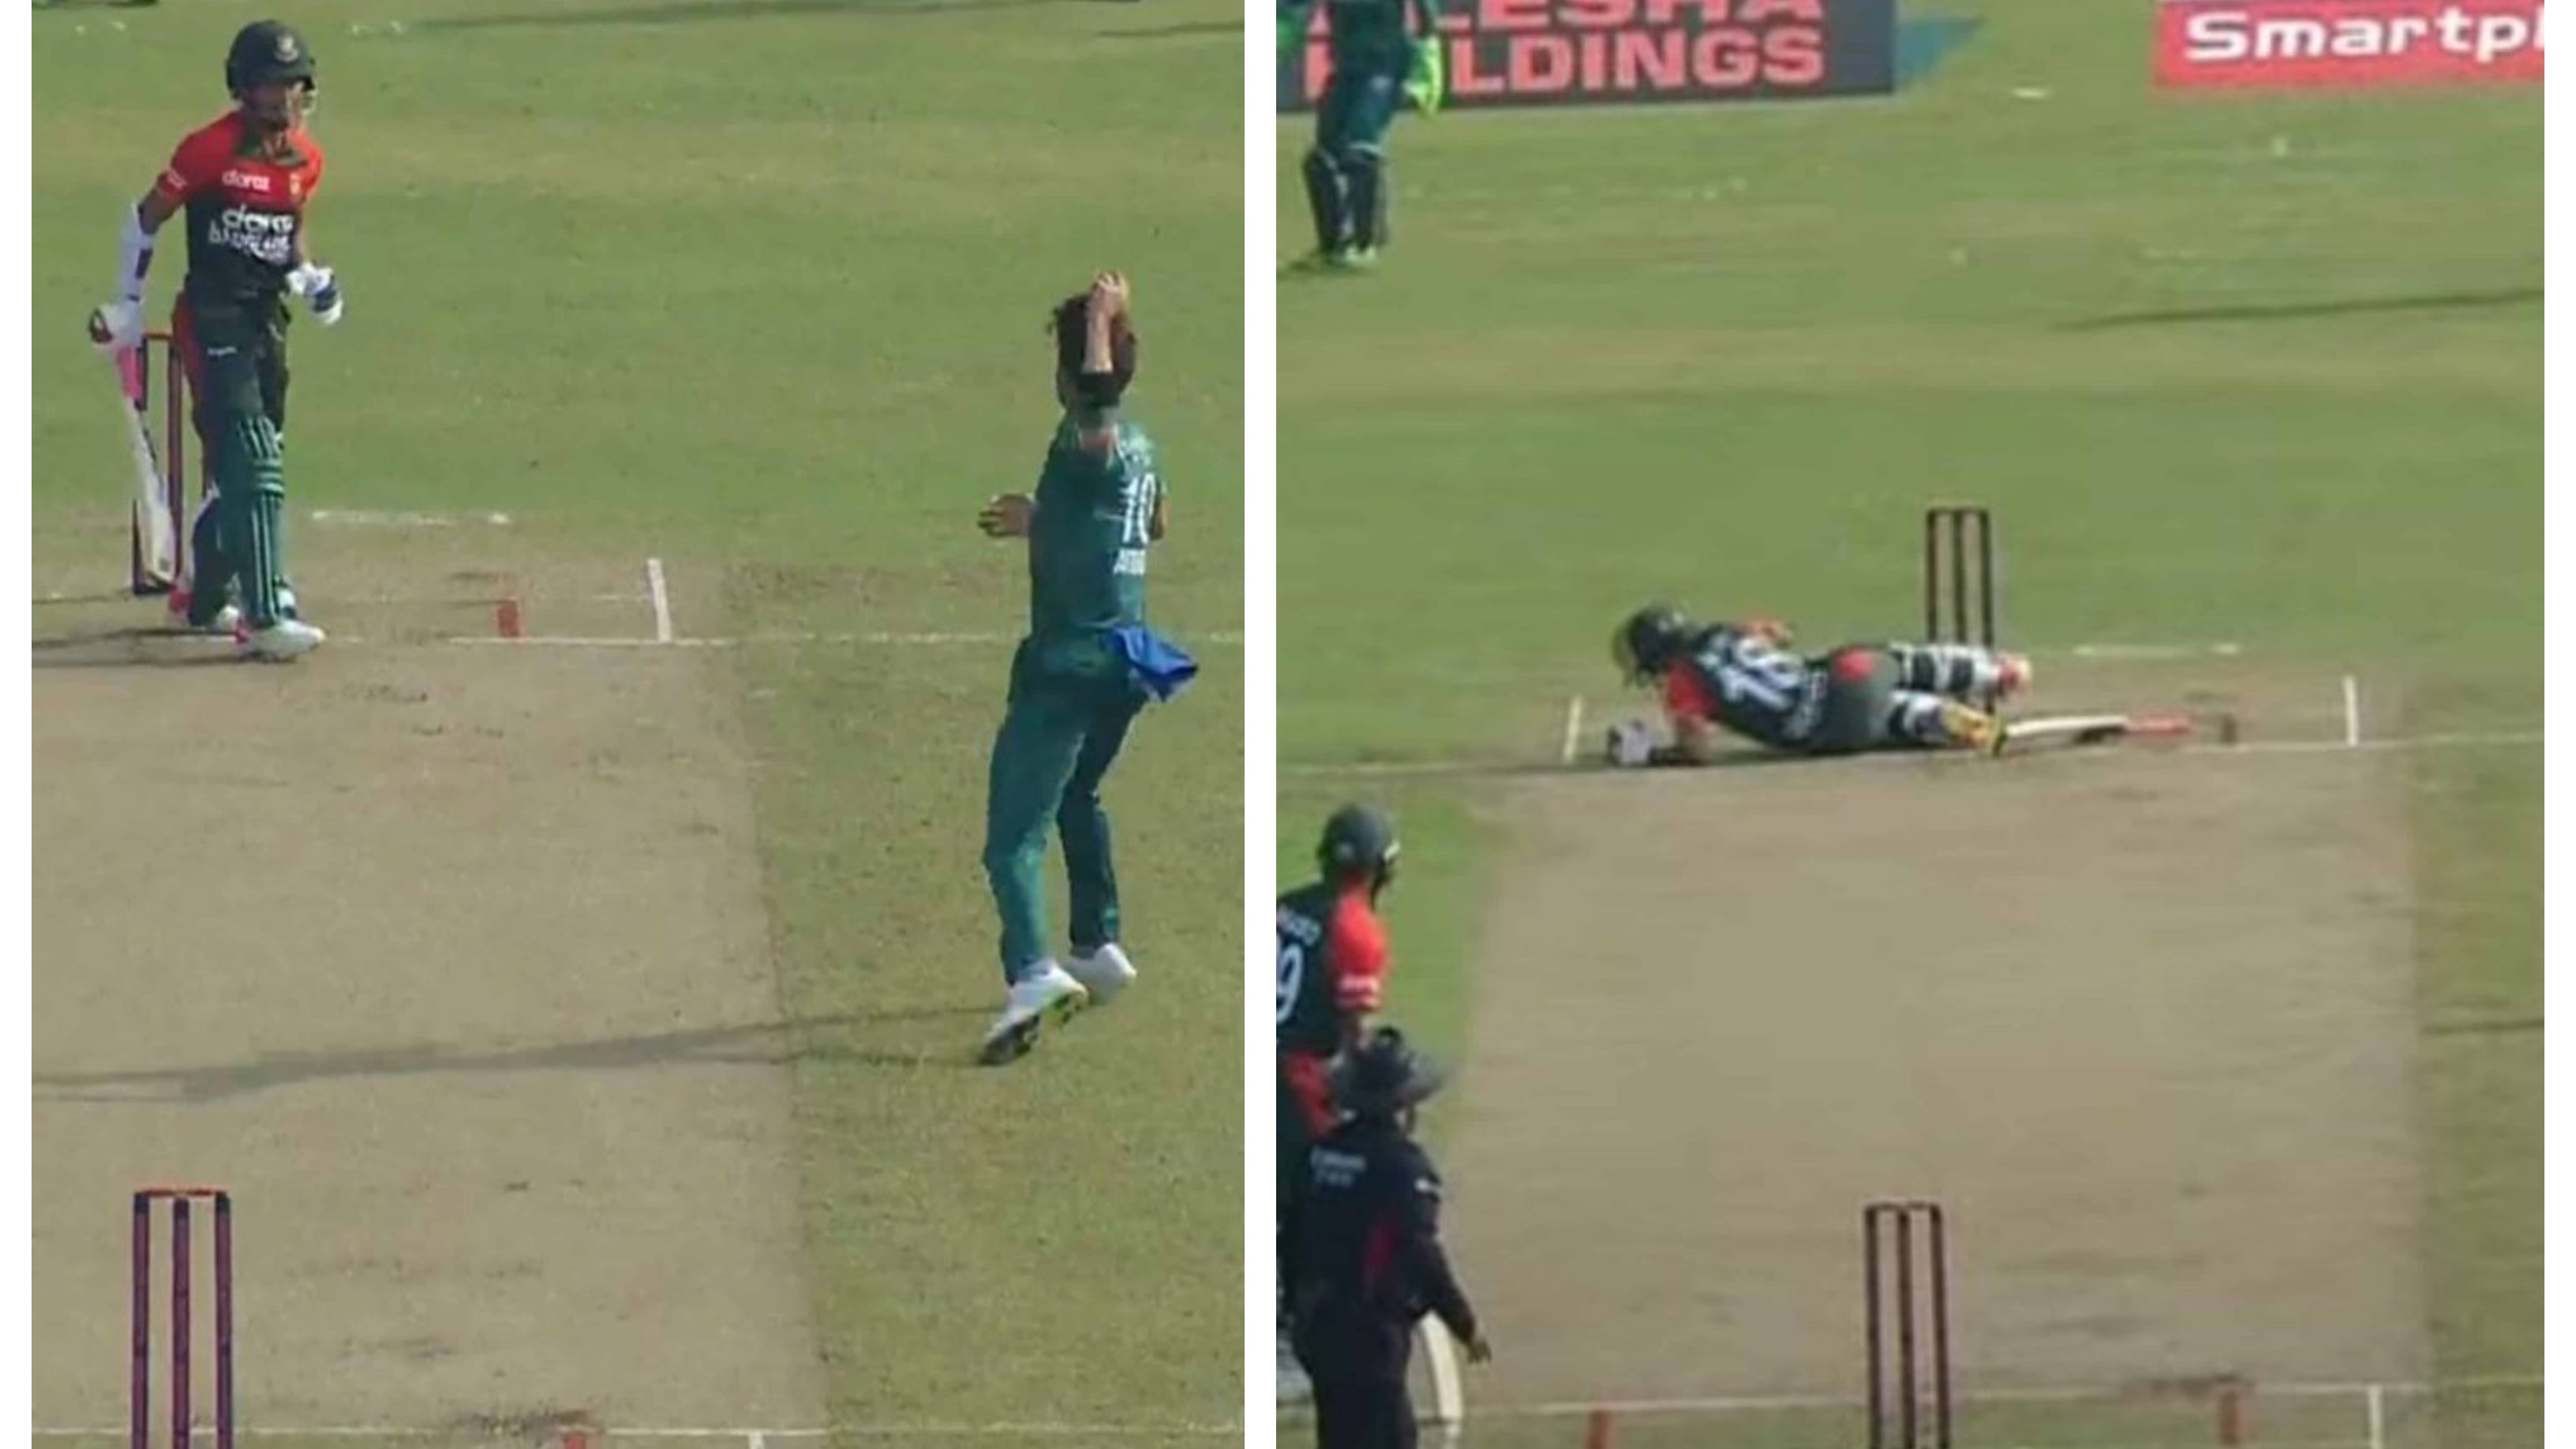 BAN v PAK 2021: WATCH – Shaheen Afridi hits Afif Hossain with a throw on follow-through during 2nd T20I